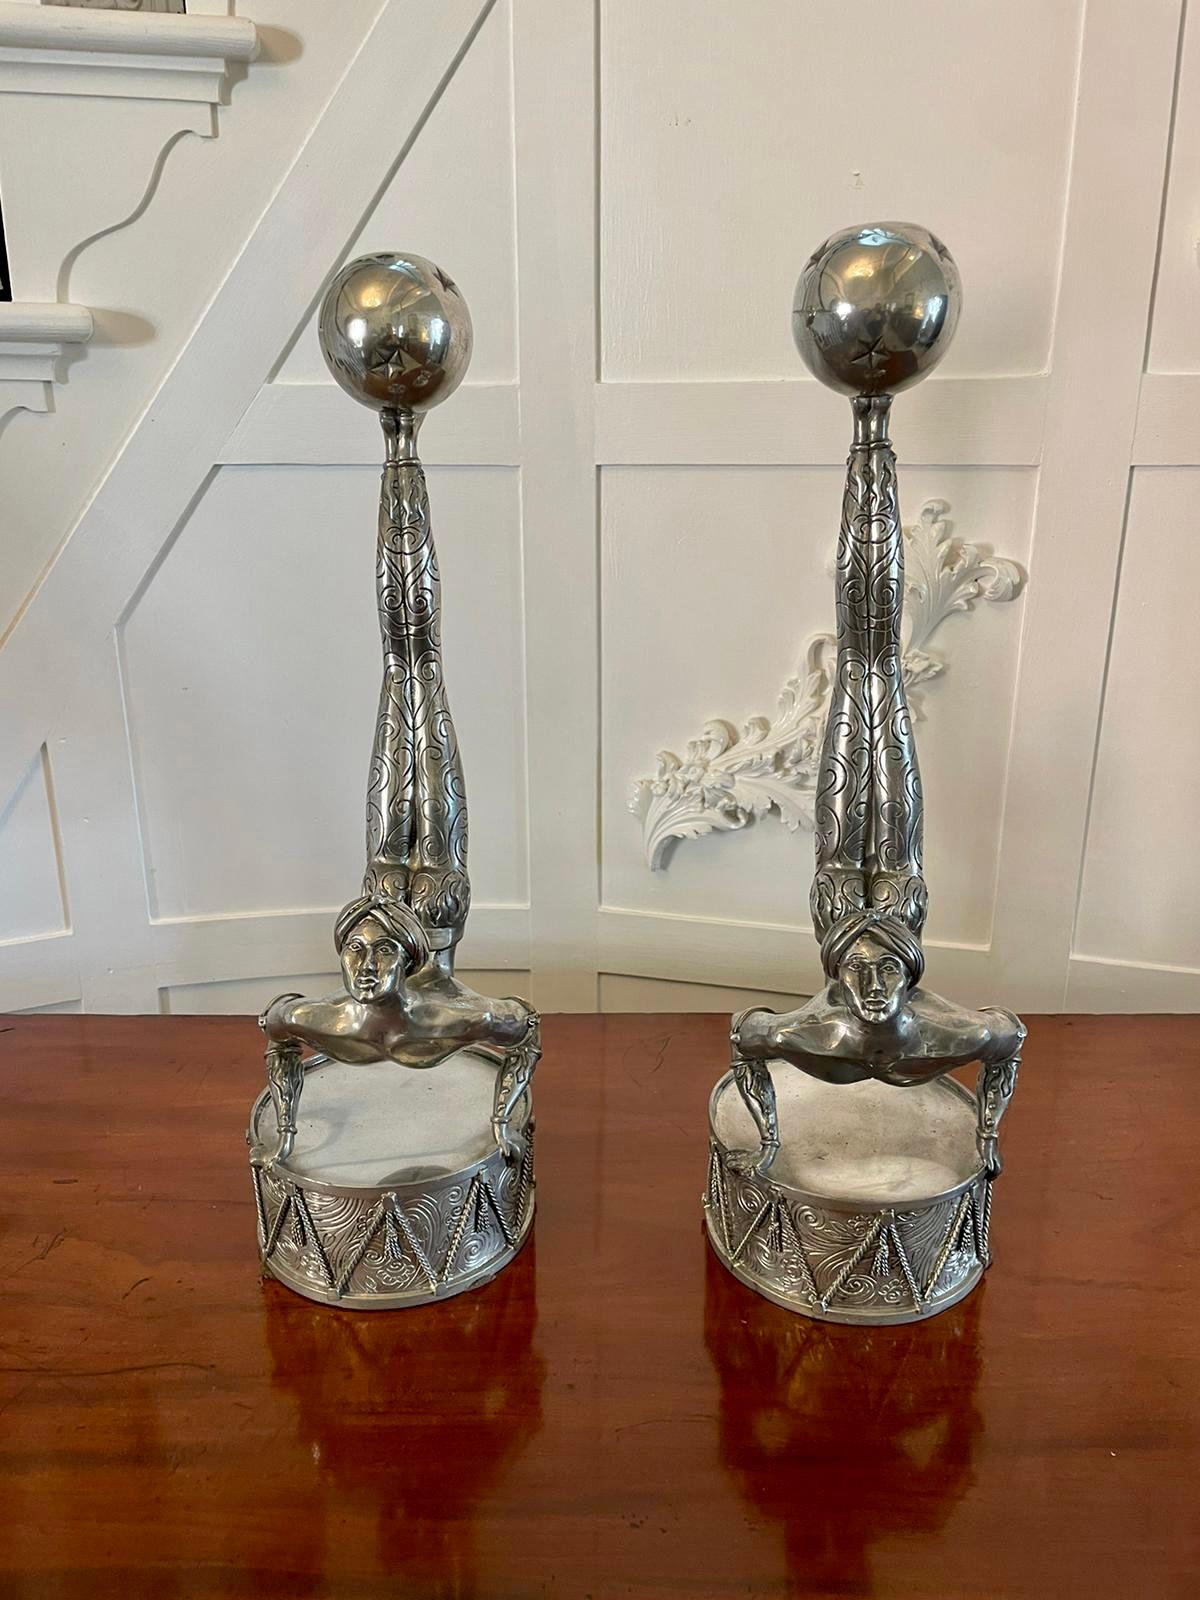 Unusual Pair of antique quality Art Deco silver plated candlesticks having a circus acrobat balancing a ball candle holder on his feet holding onto an ornate drum 

A charming pair having a splendid and unusual design

Measures: H 49.5cm x W